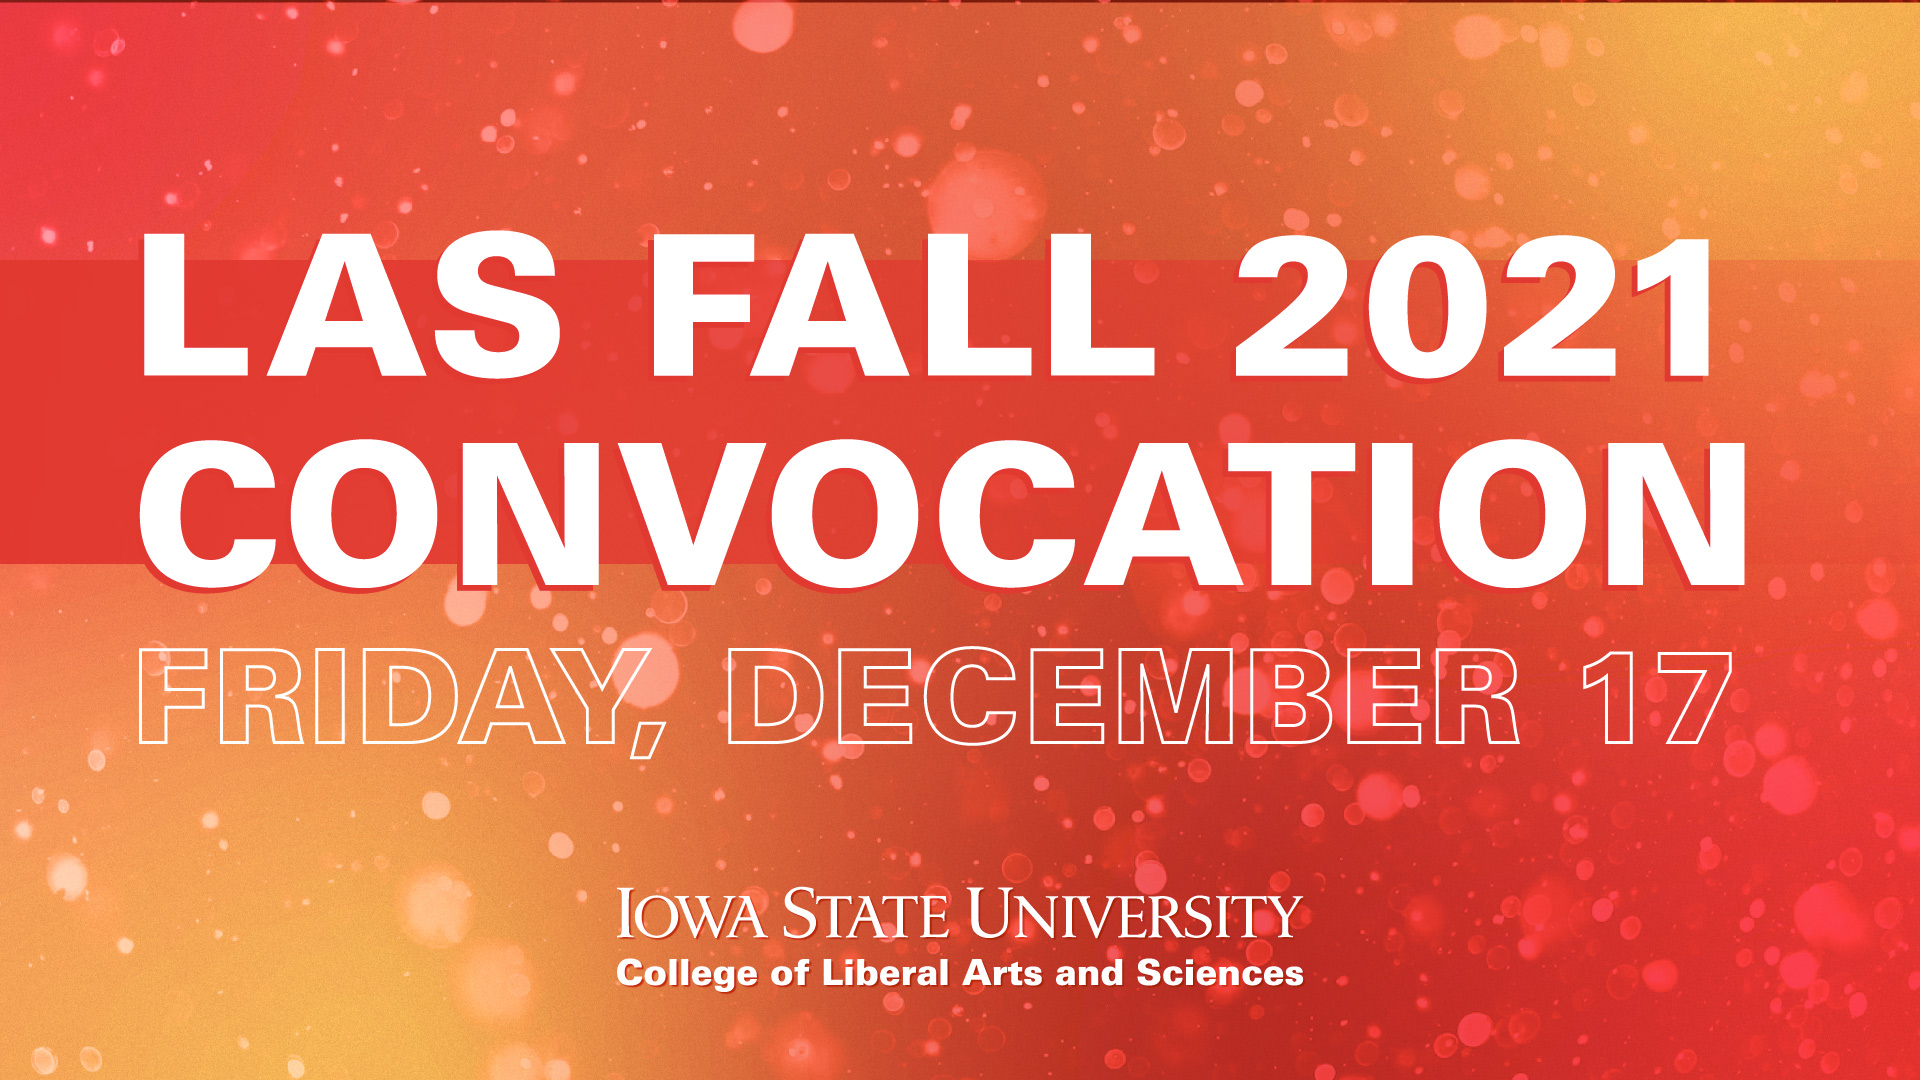 Orange, yellow and red LAS Fall 2021 Convocation graphic